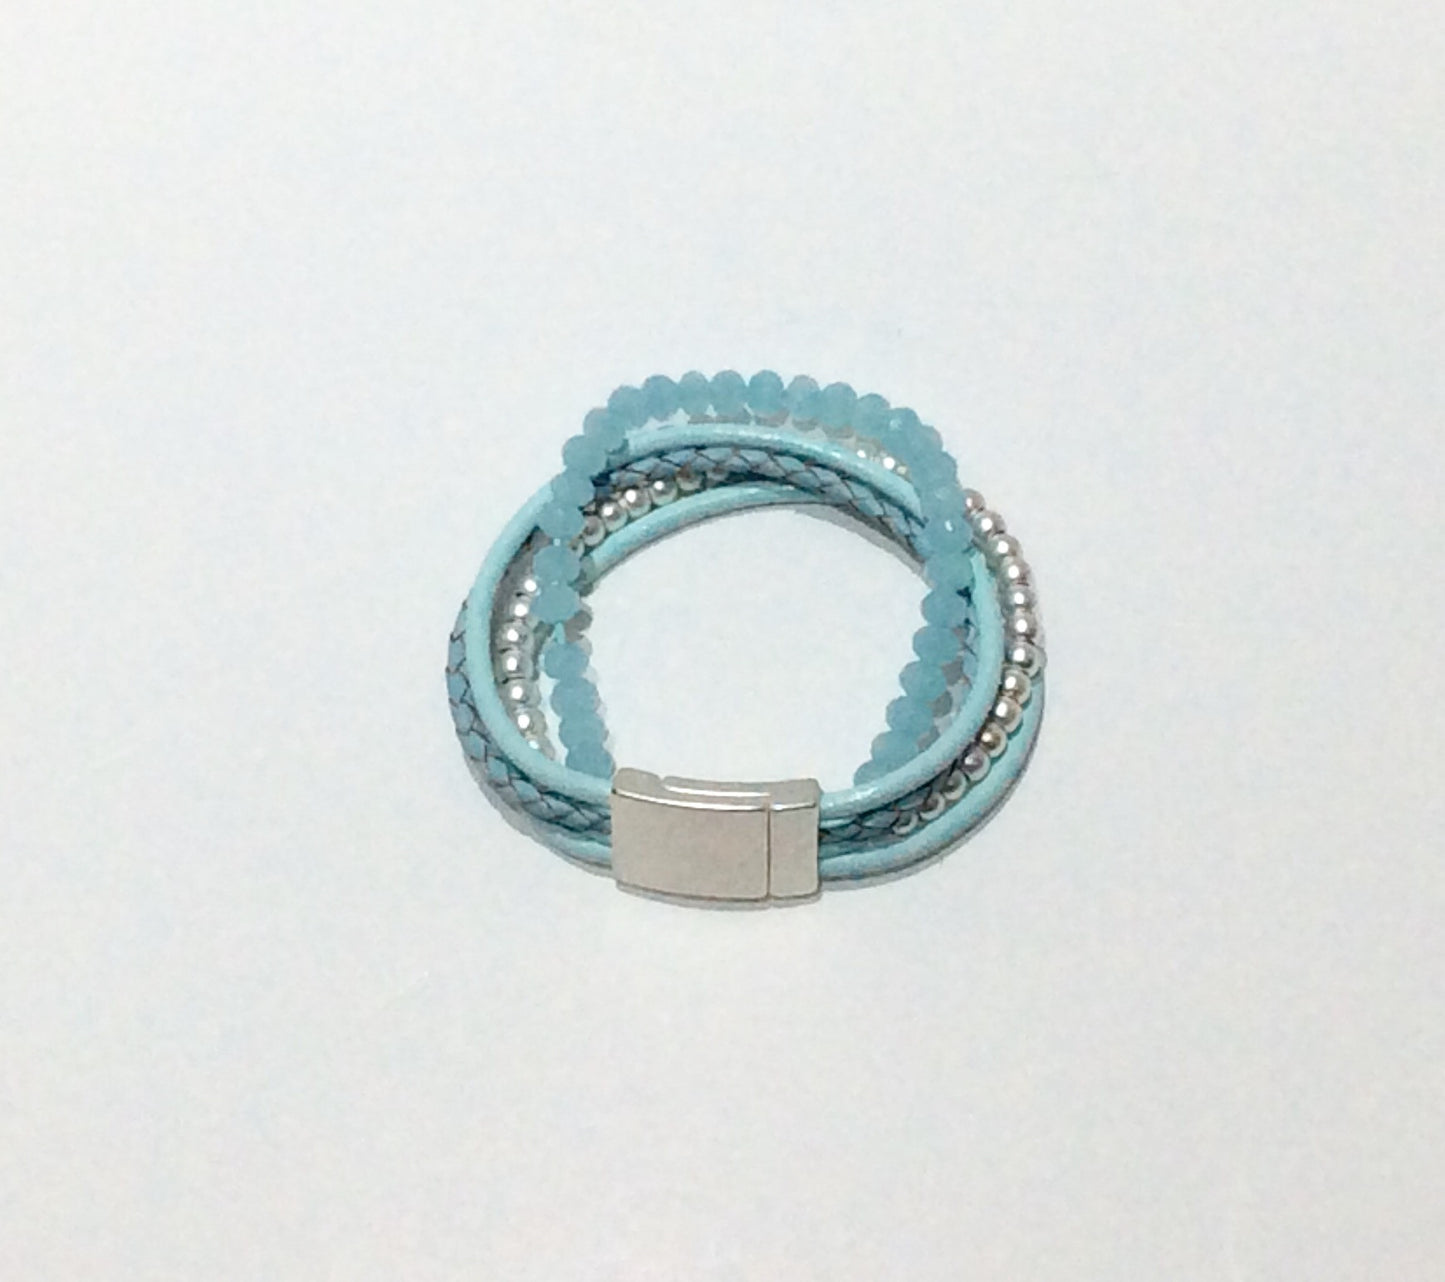 Bracelet-Pale blue leather and crystal bead 5 strand bracelet with magnetic clasp